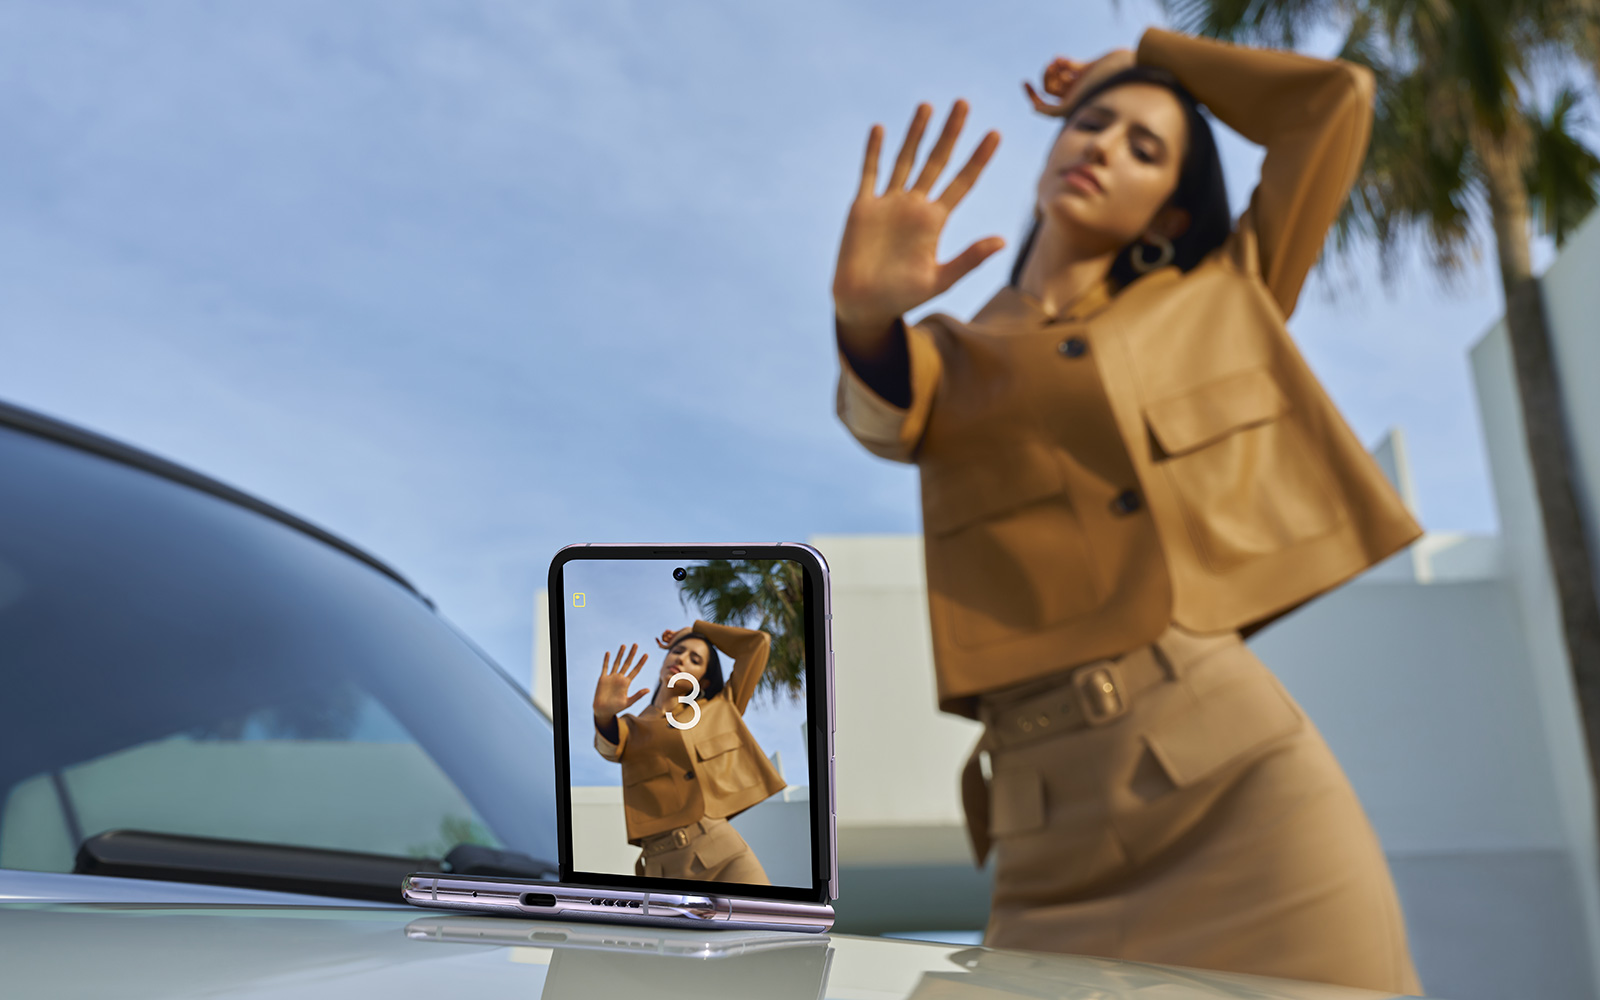 A half-opened Tecno Phantom V Flip phone placed on a car hood, with its main camera facing a model who is posing with a hand gesture to remotely trigger the shot.